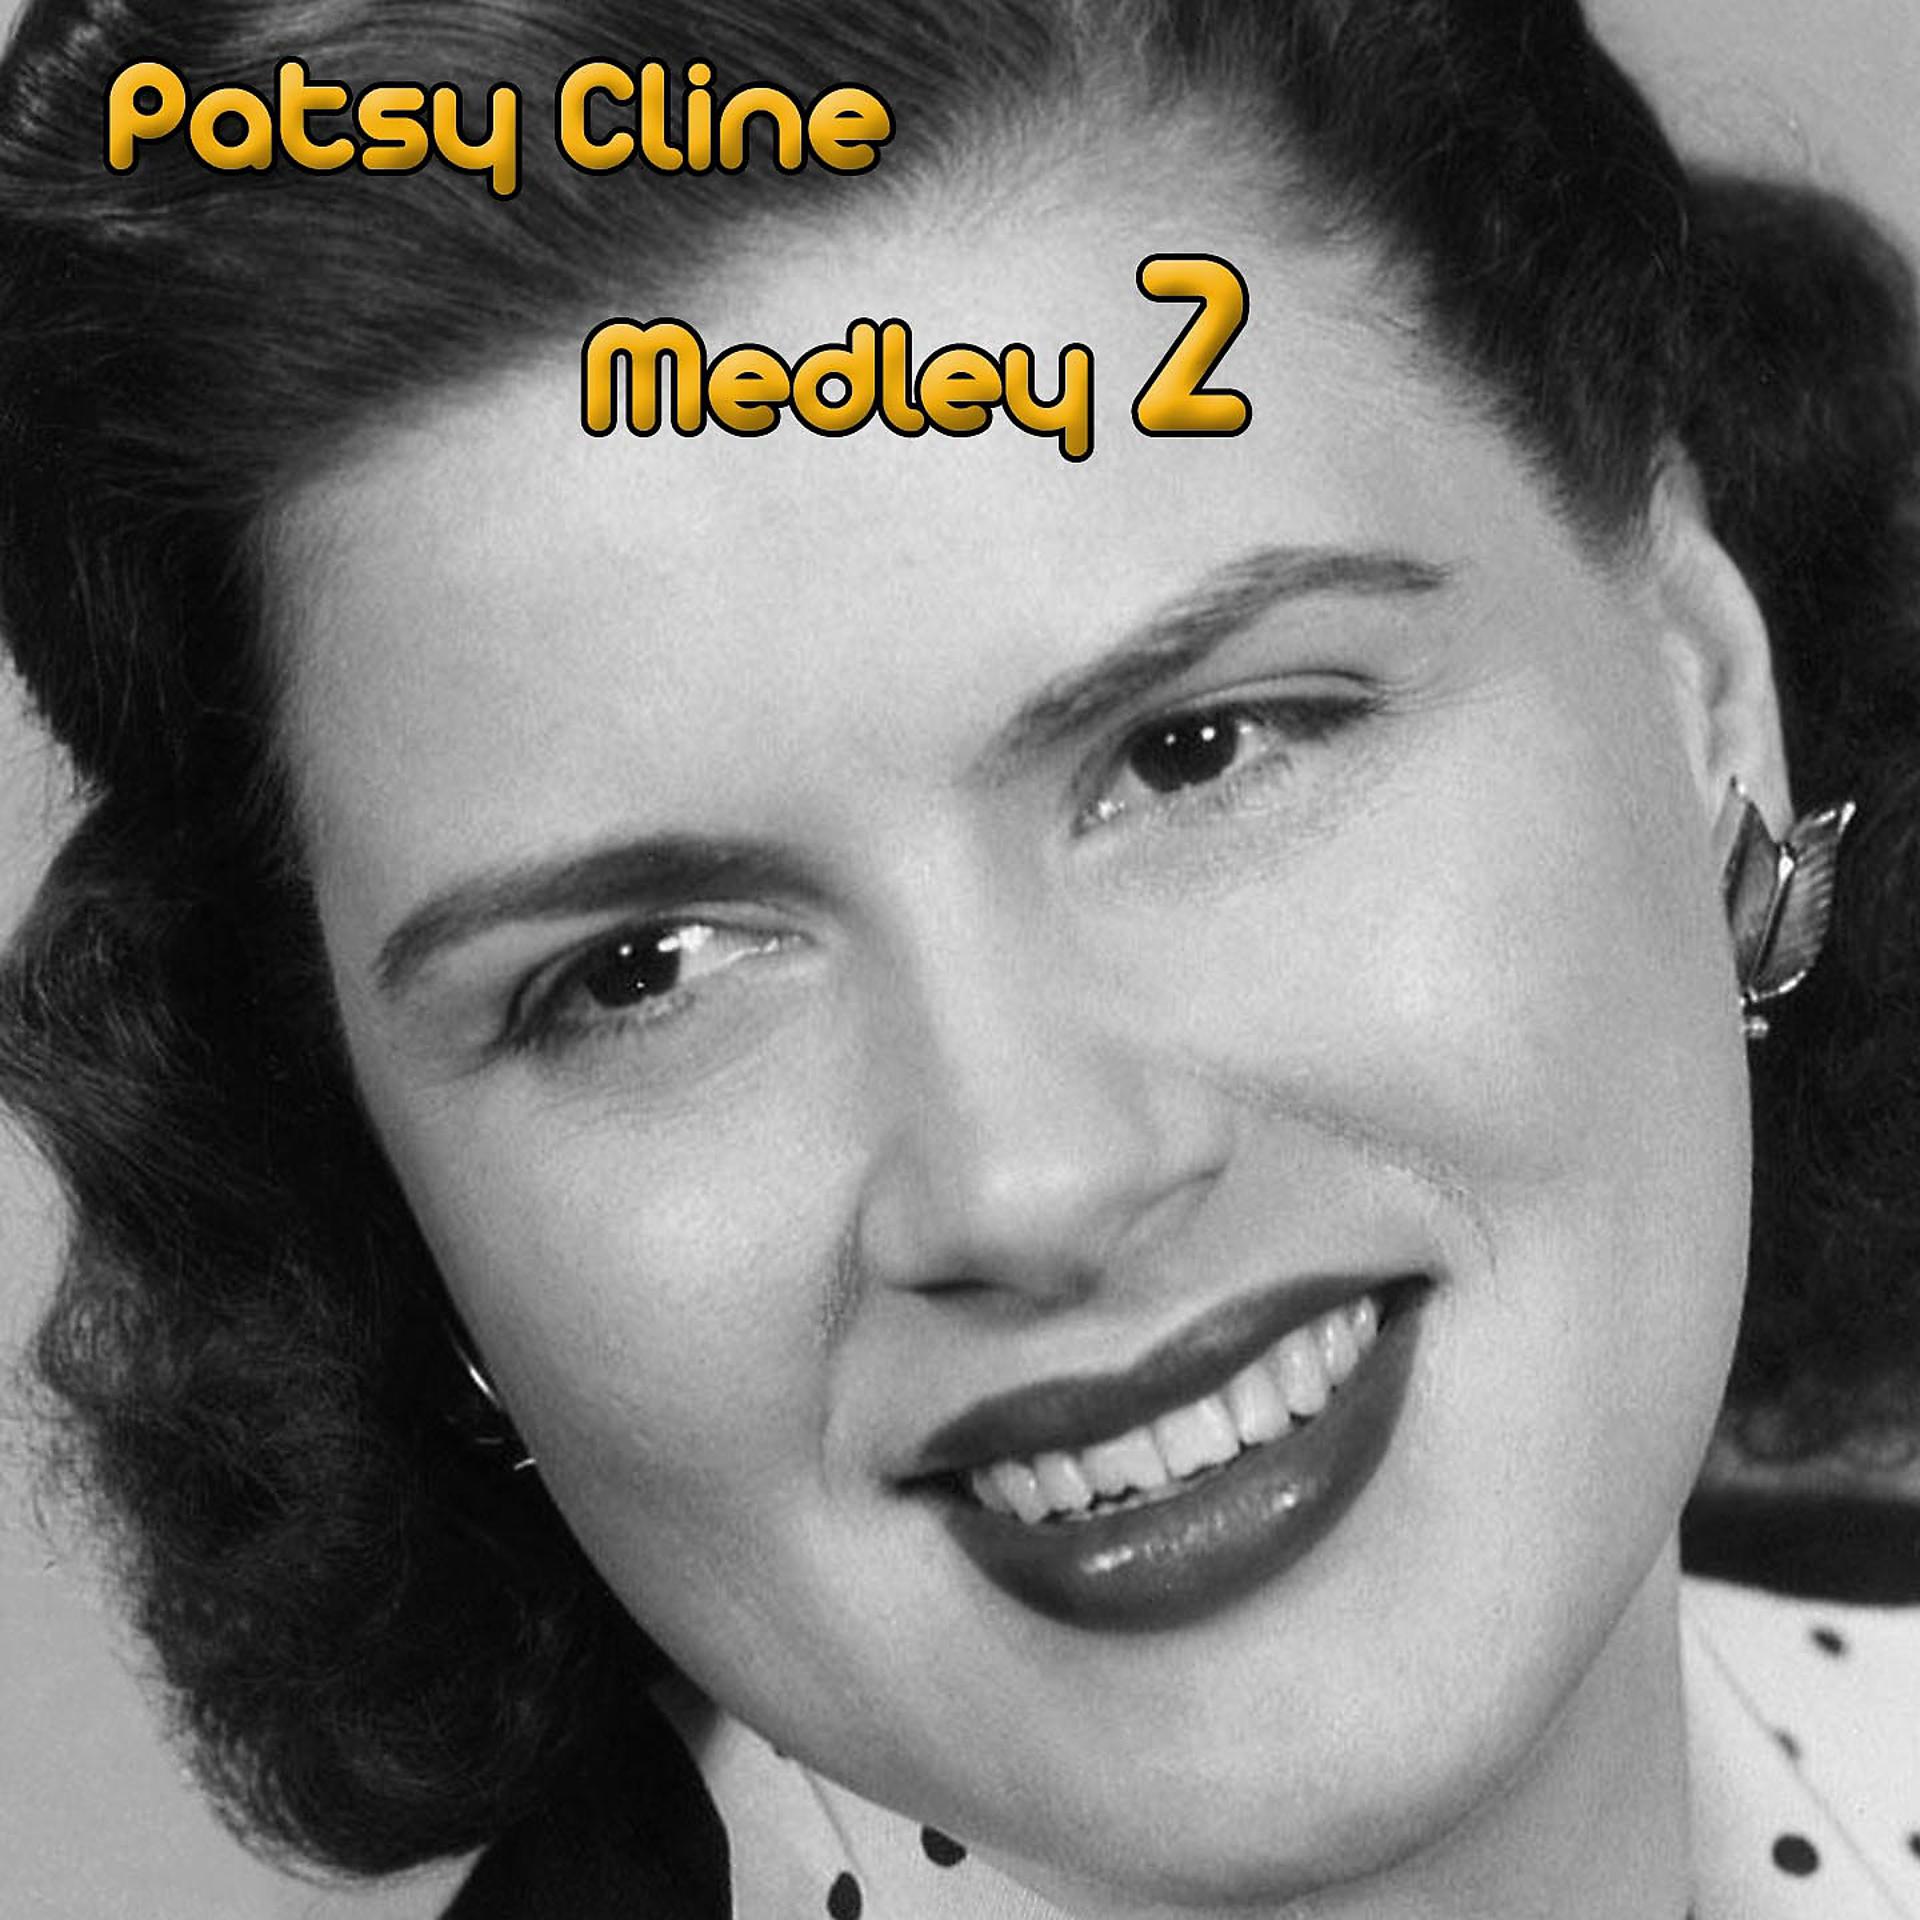 Постер альбома Patsy Cline Medley 2: The Heart You Break May Be Your Own / Dear God / Life's Railway to Heaven / If I Could Only Stay Asleep / He Will Do for You (What He's Done for Me) / There He Goes / Just out of Reach / That Wonderful Someone / In Care of the Blues